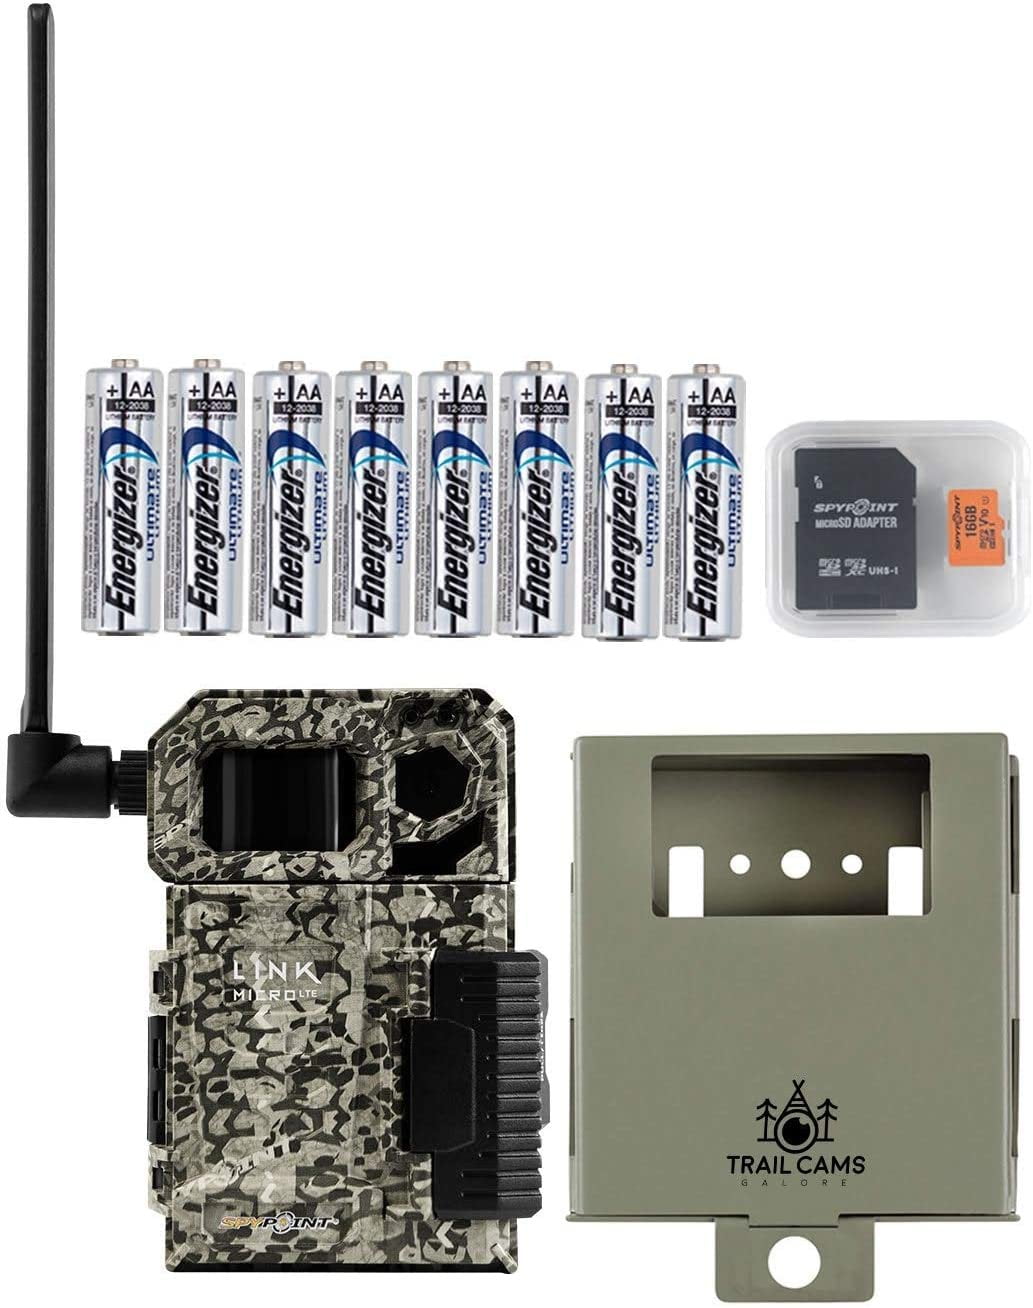 SPYPOINT LINK-MICRO-LTE TWIN Premium Pack of Cellular Trail Cameras includes 16 AA batteries and two 16g MicroSD card Low-Glow LEDs for Quality Nighttime 10MP Photos 4G/LTE photo transmission. 80’ flash and detection range